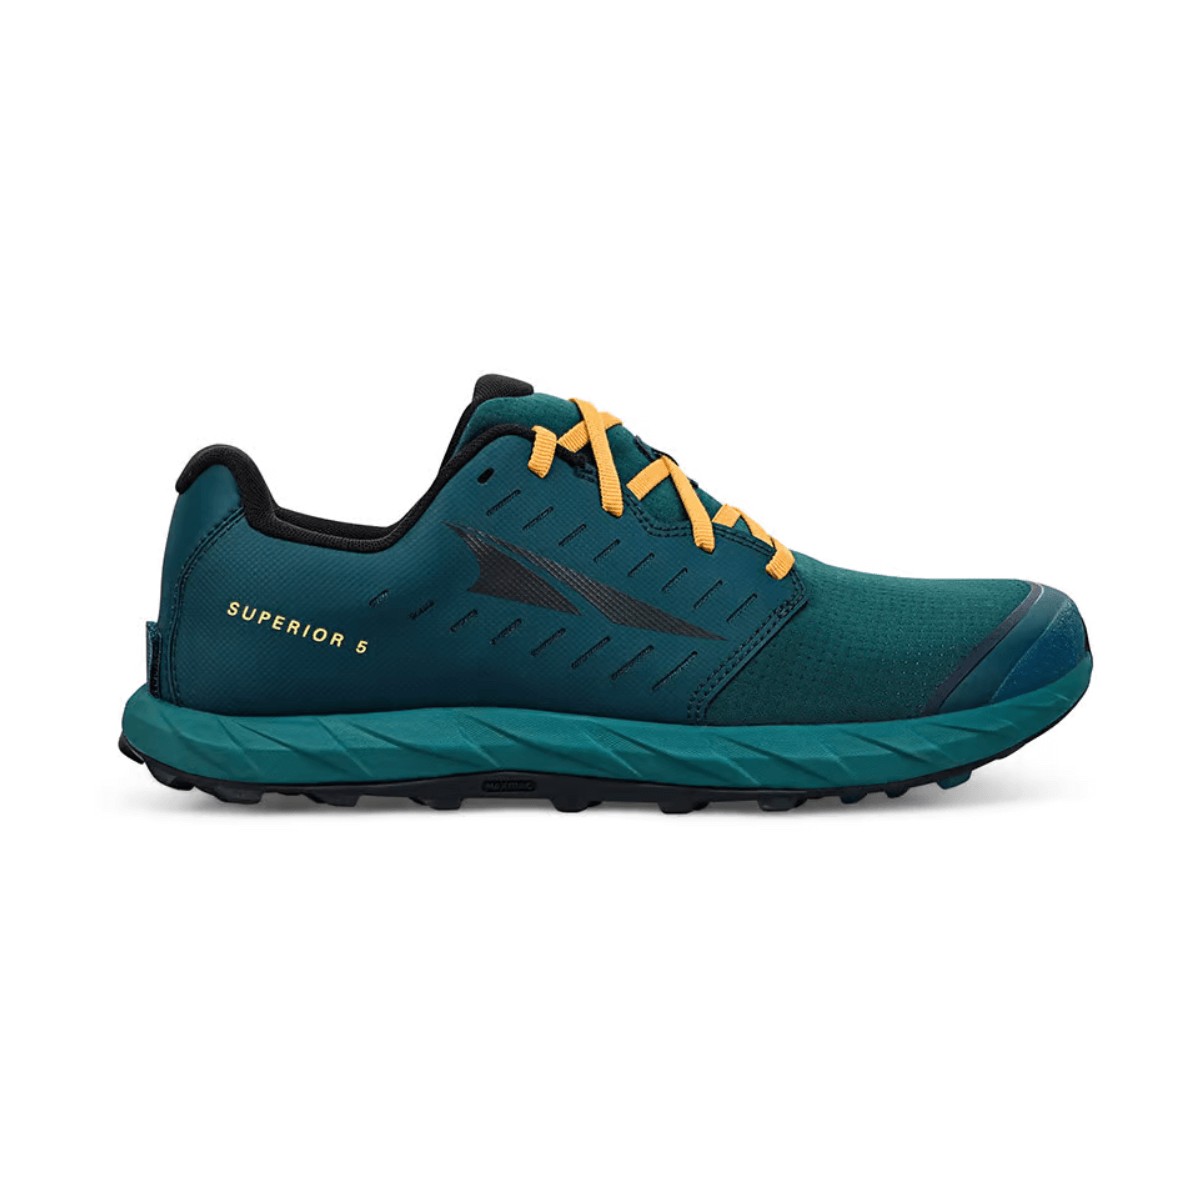 Altra Superior 5 Shoes Green Blue AW22, Size 44 - EUR